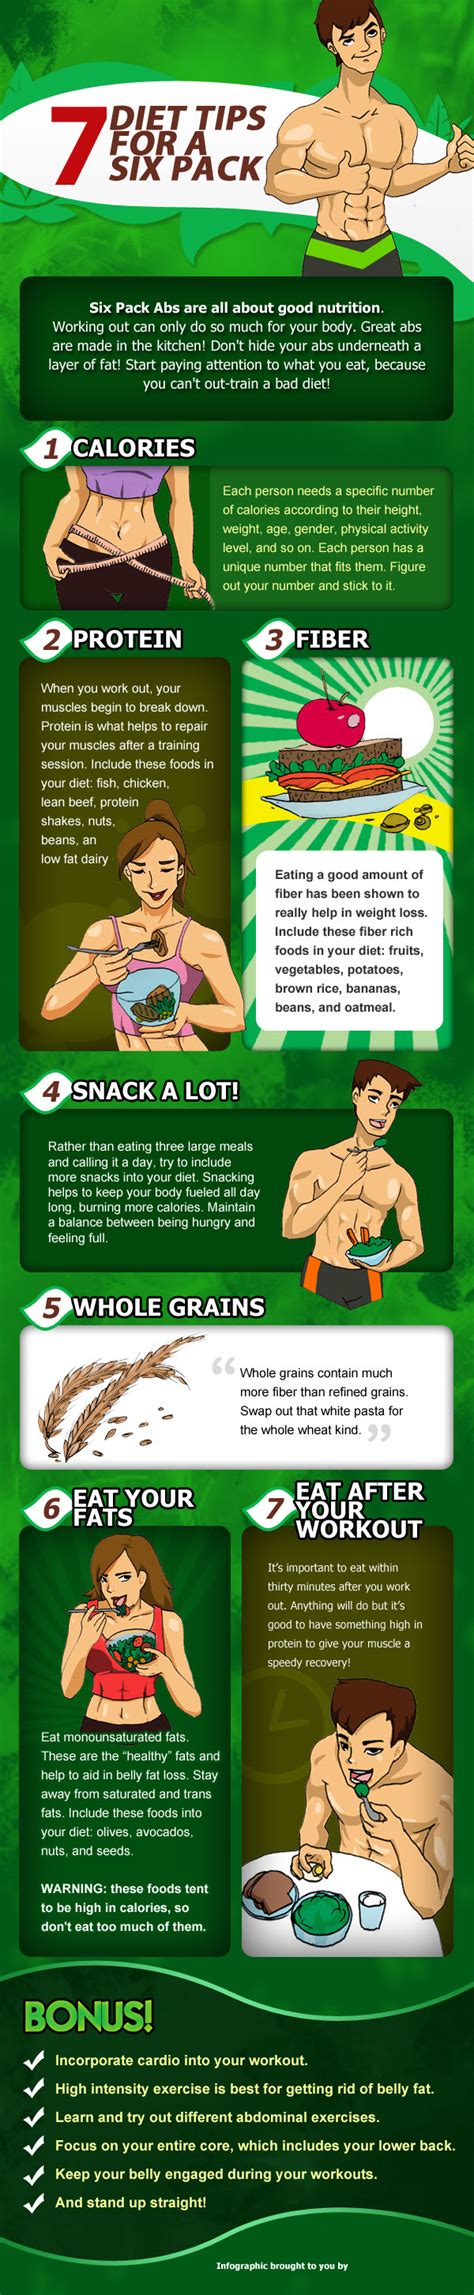 7 diet tips for 6 pack abs #muscle_fitness #fitness #health_fitness #fitness_tips #body_fitness ...